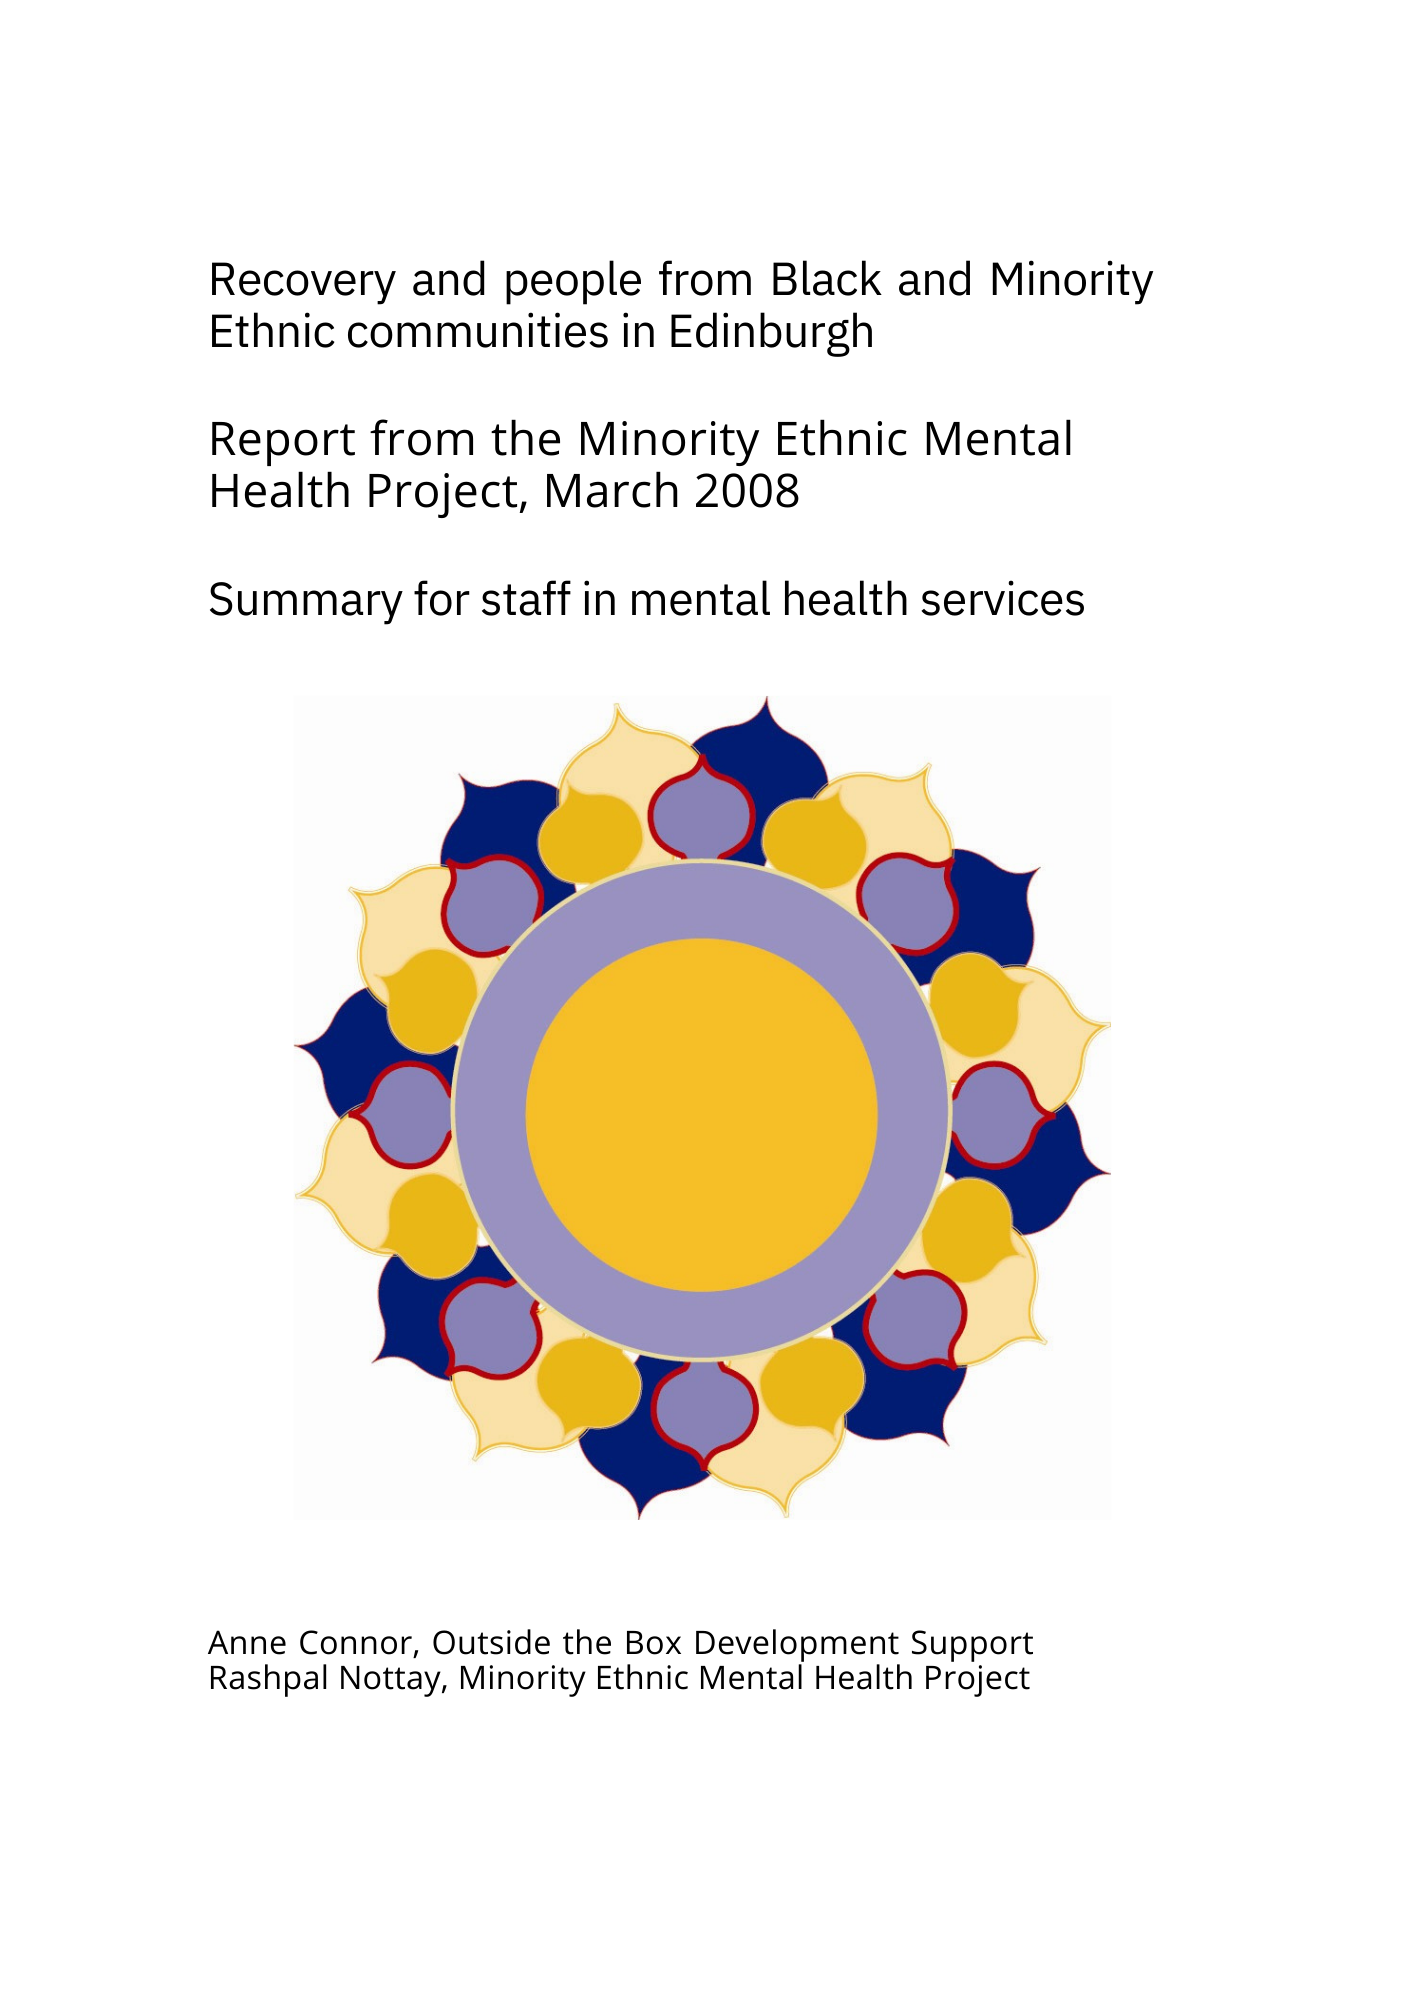 Report from the Minority Ethnic Mental Health Project 2008. Summary for staff in mental health services